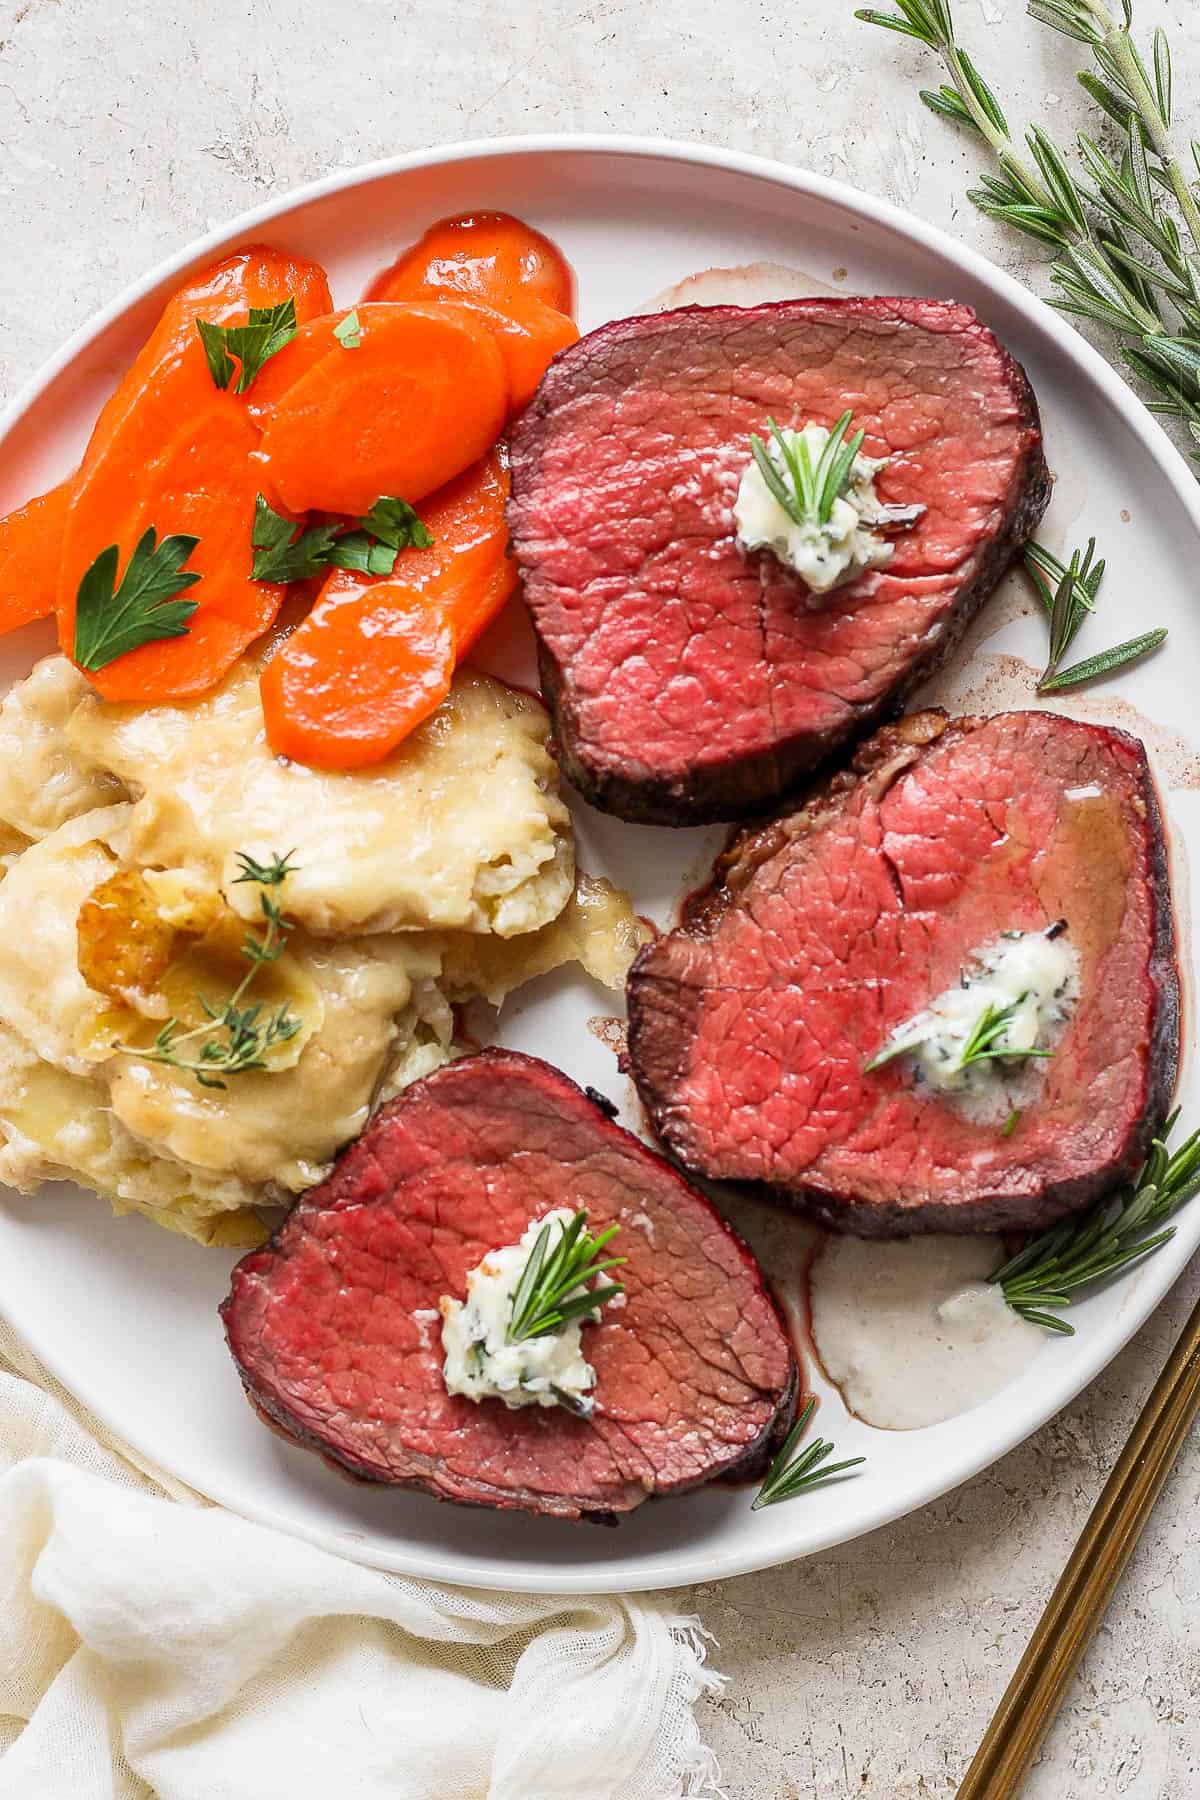 Potatoes au gratin on a plate with beef tenderloin and carrots.